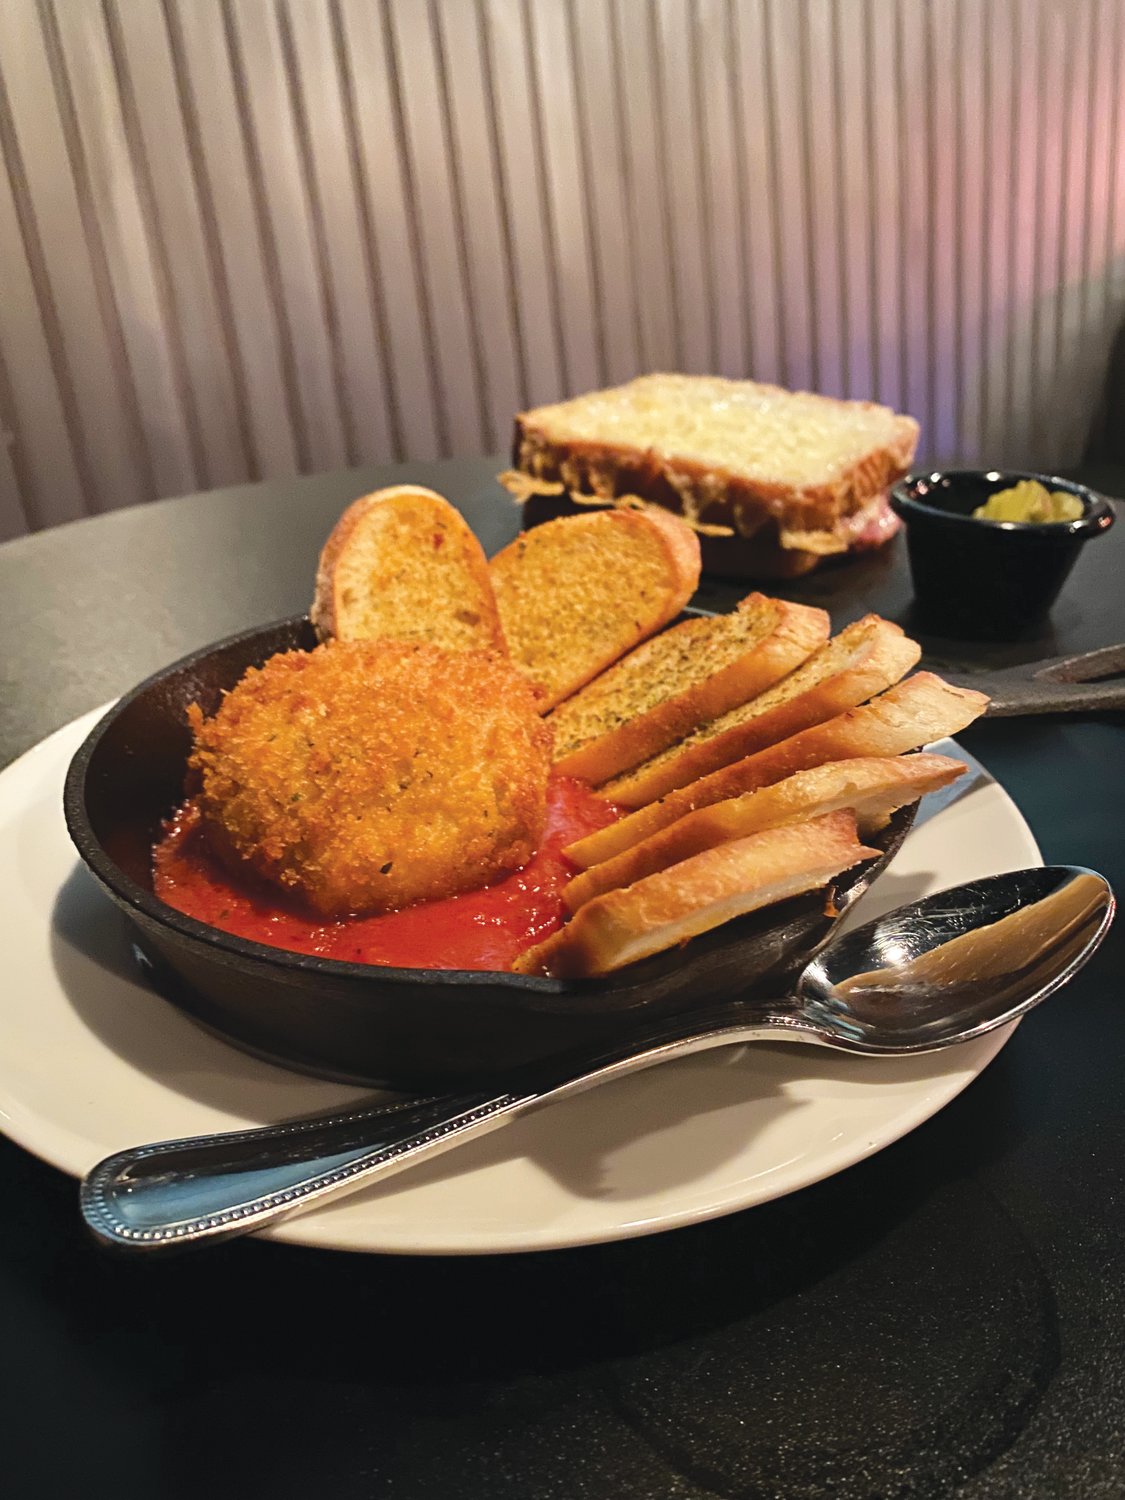 Petrichor’s take on a burrata plate, front, is fried burrata in marinara with garlic crostini. The croque monsieur, back, is made with Black Forest ham and Gruyere on country bread.